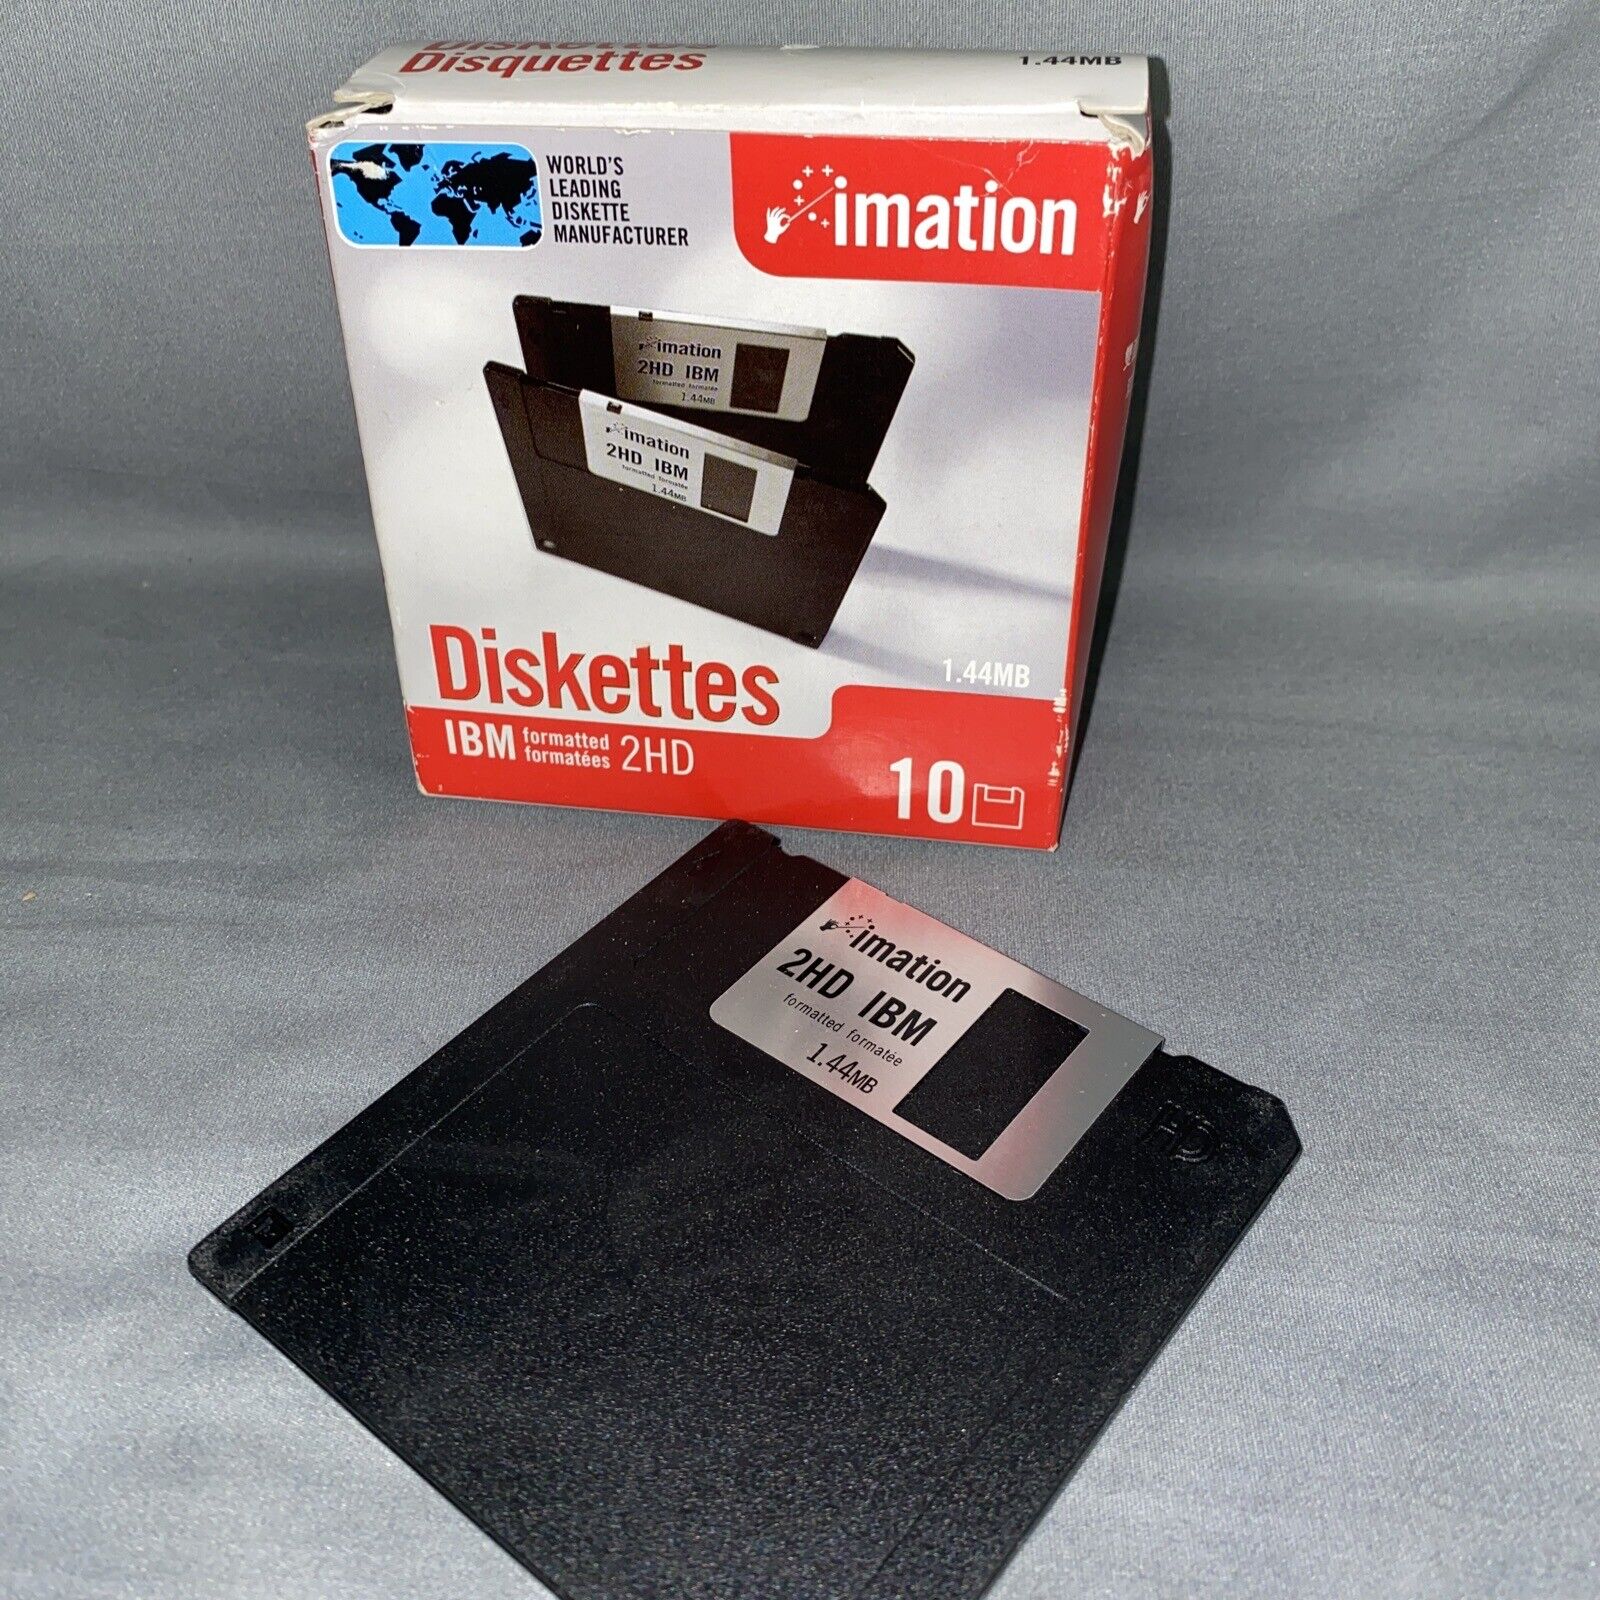 Imation 3.5” Floppy Diskettes  IBM Formatted 1.44MB 2HD Pack Of 9